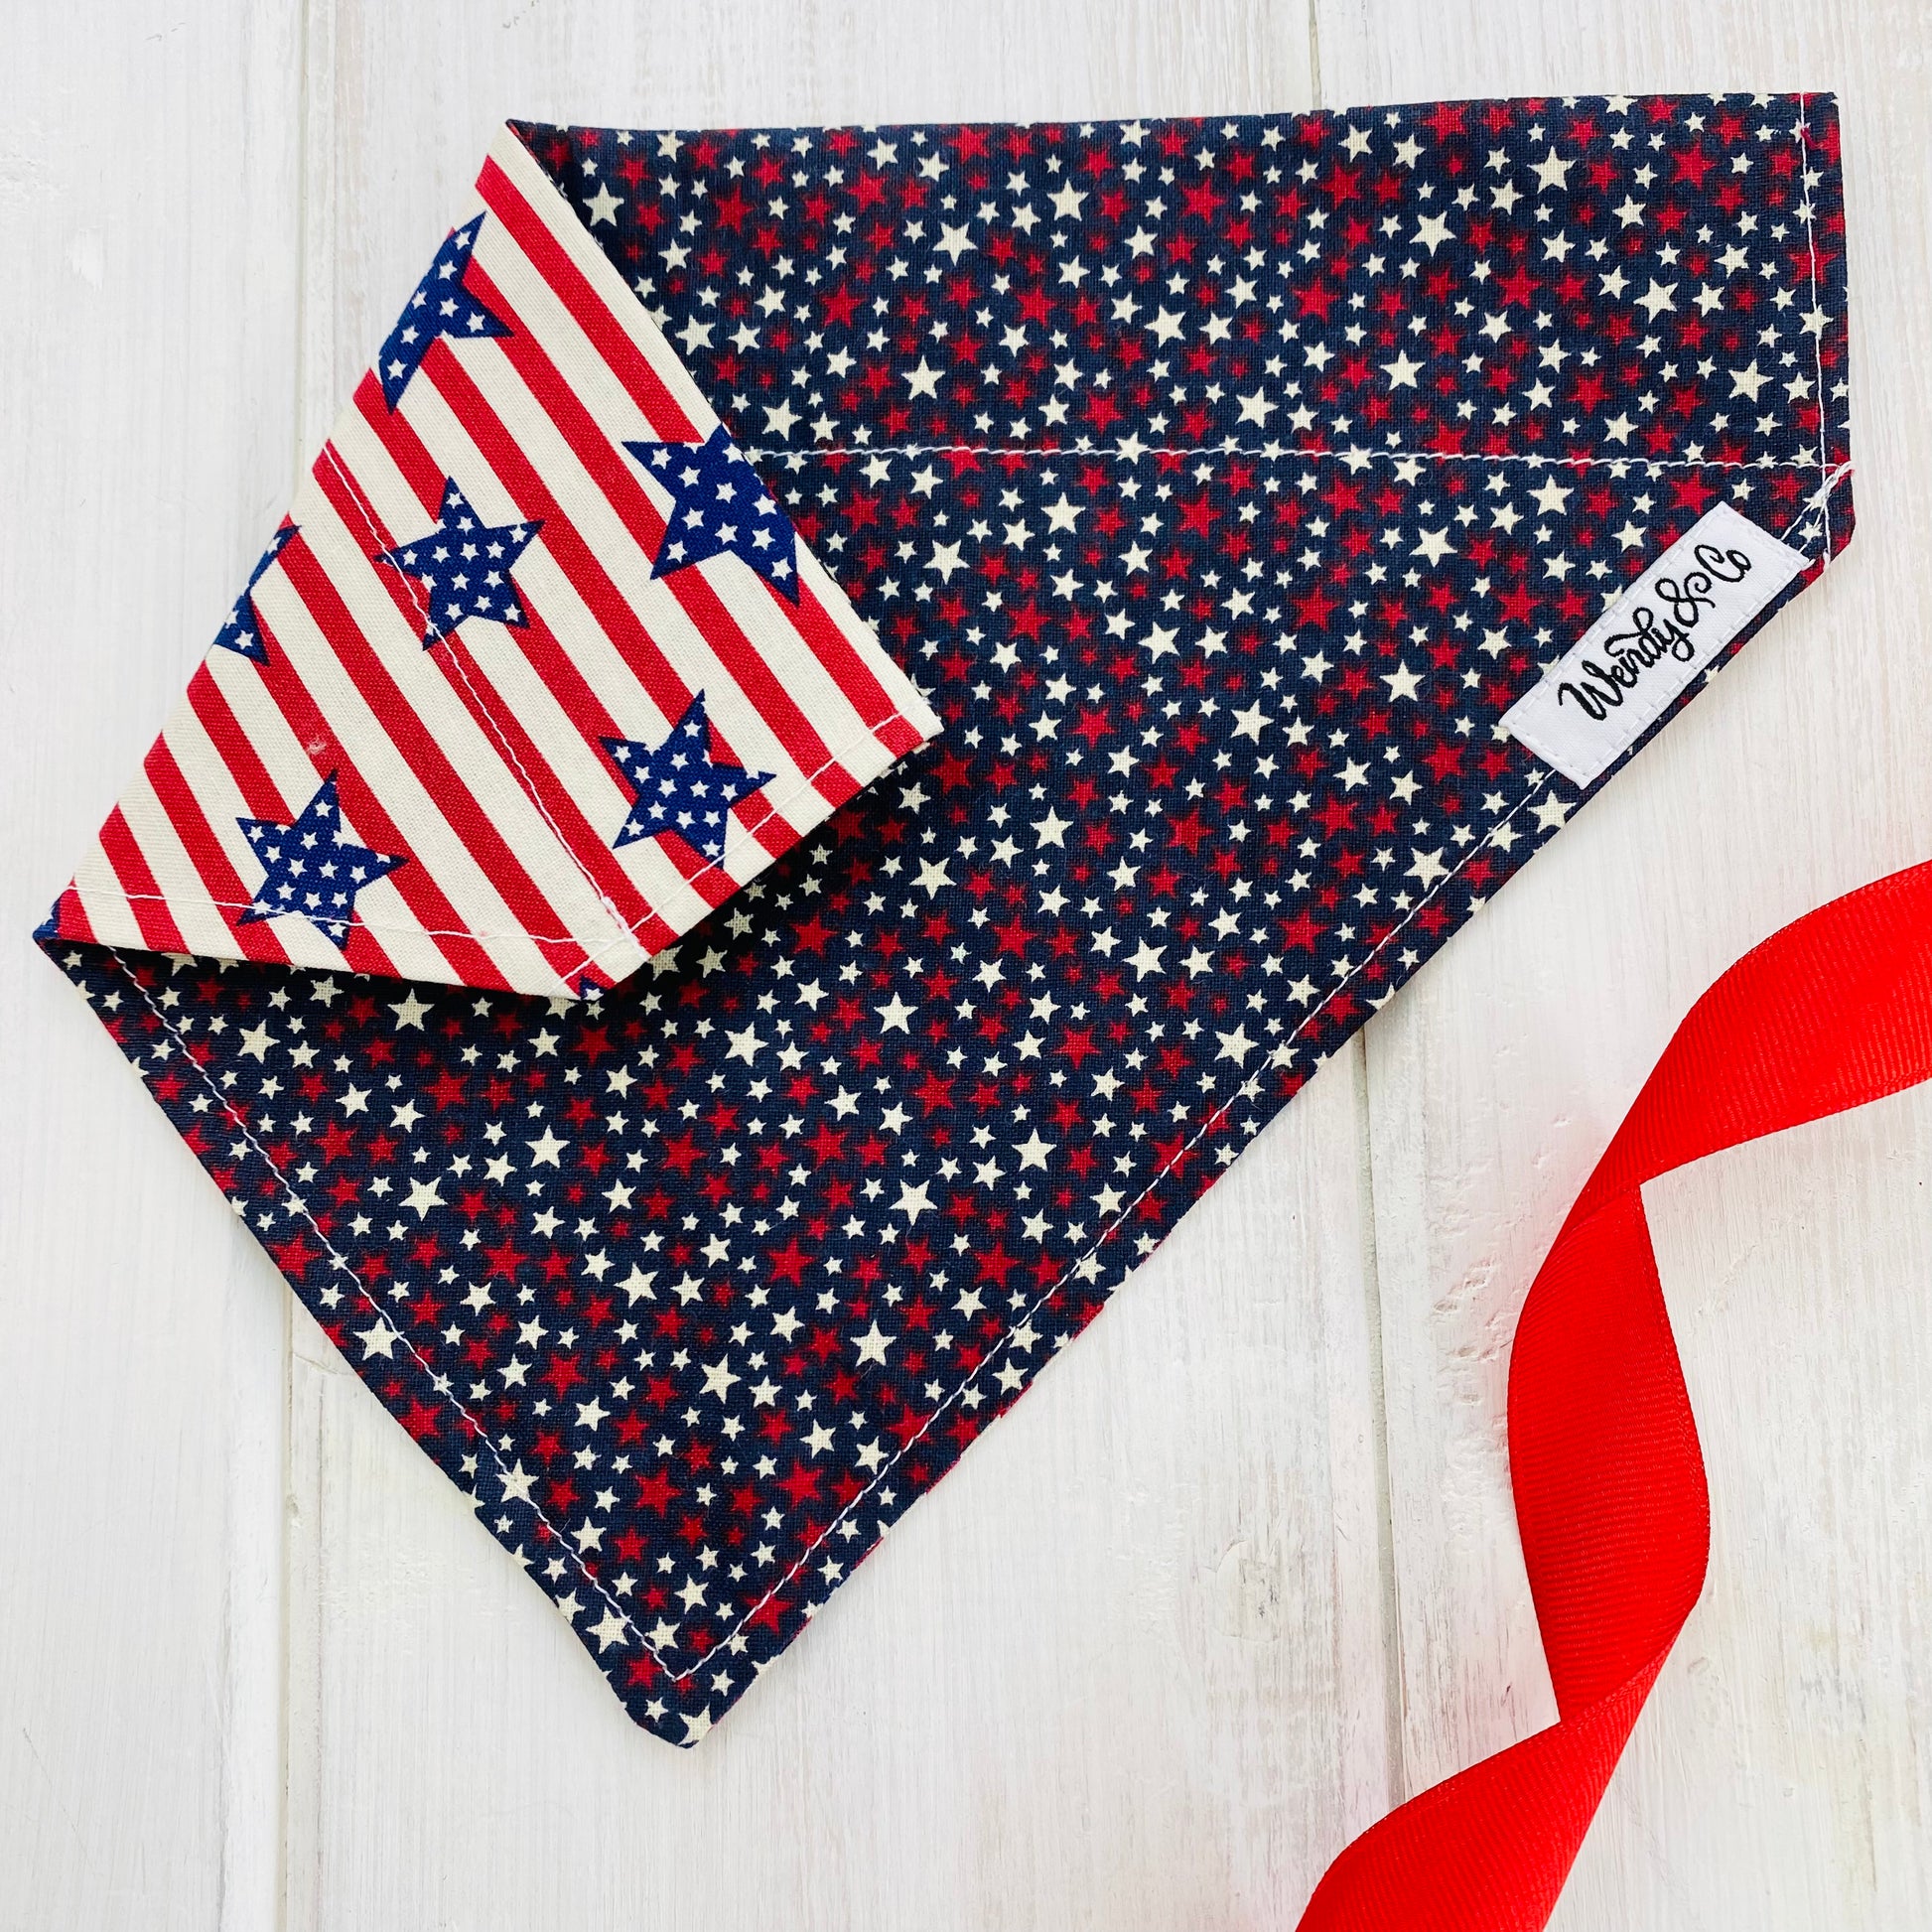 reversible handmade dog bandana, navy fabric with red and cream stars, reverse side is red and cream stripes with navy stars.